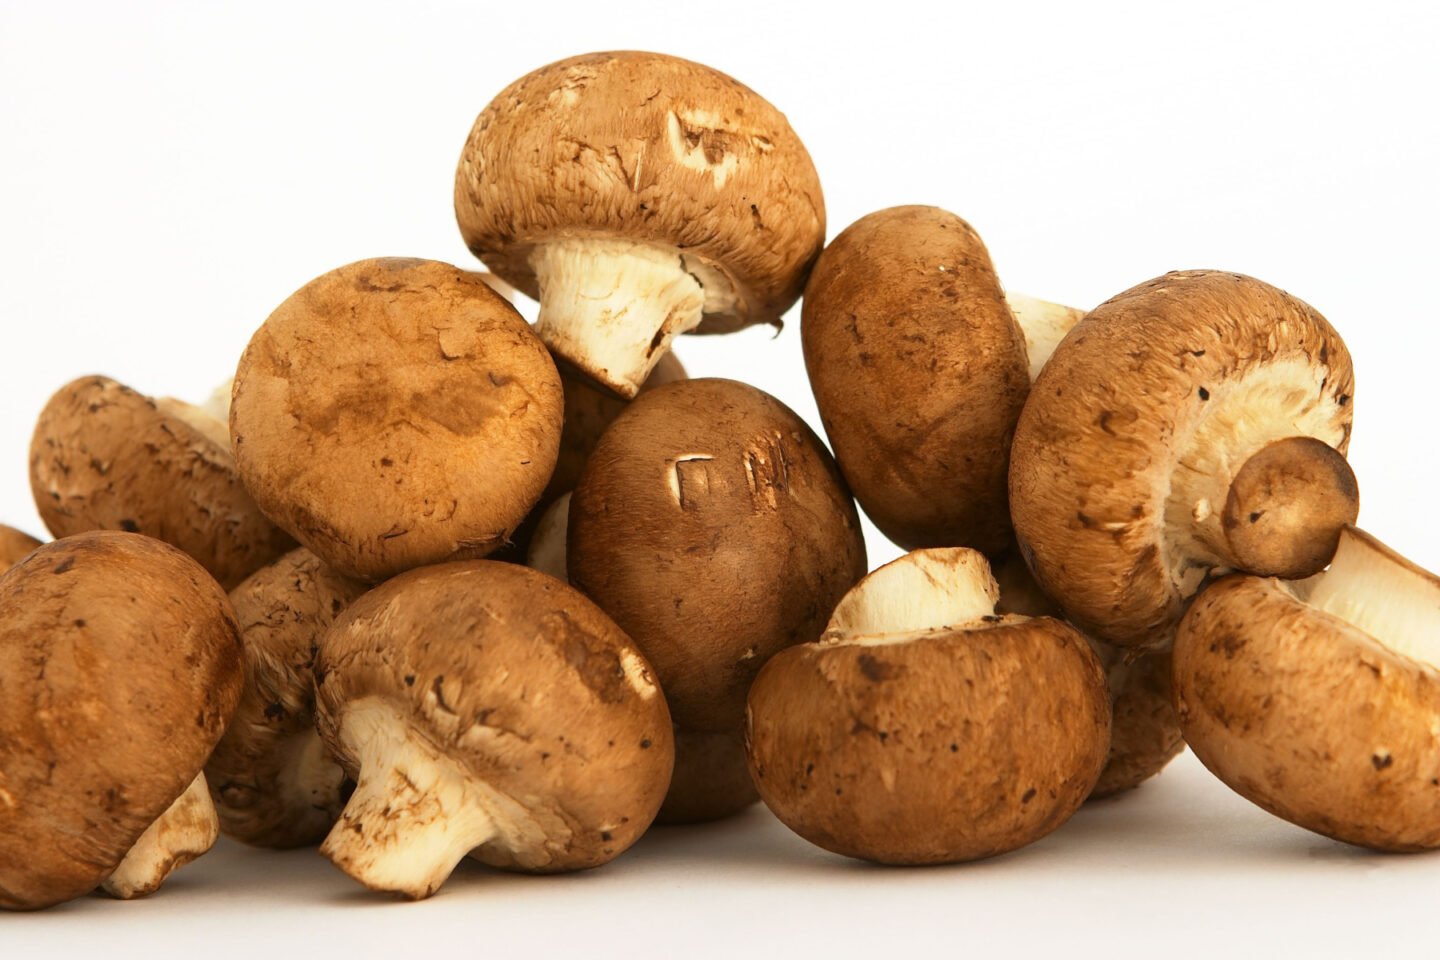 prepped chestnut mushrooms for cooking